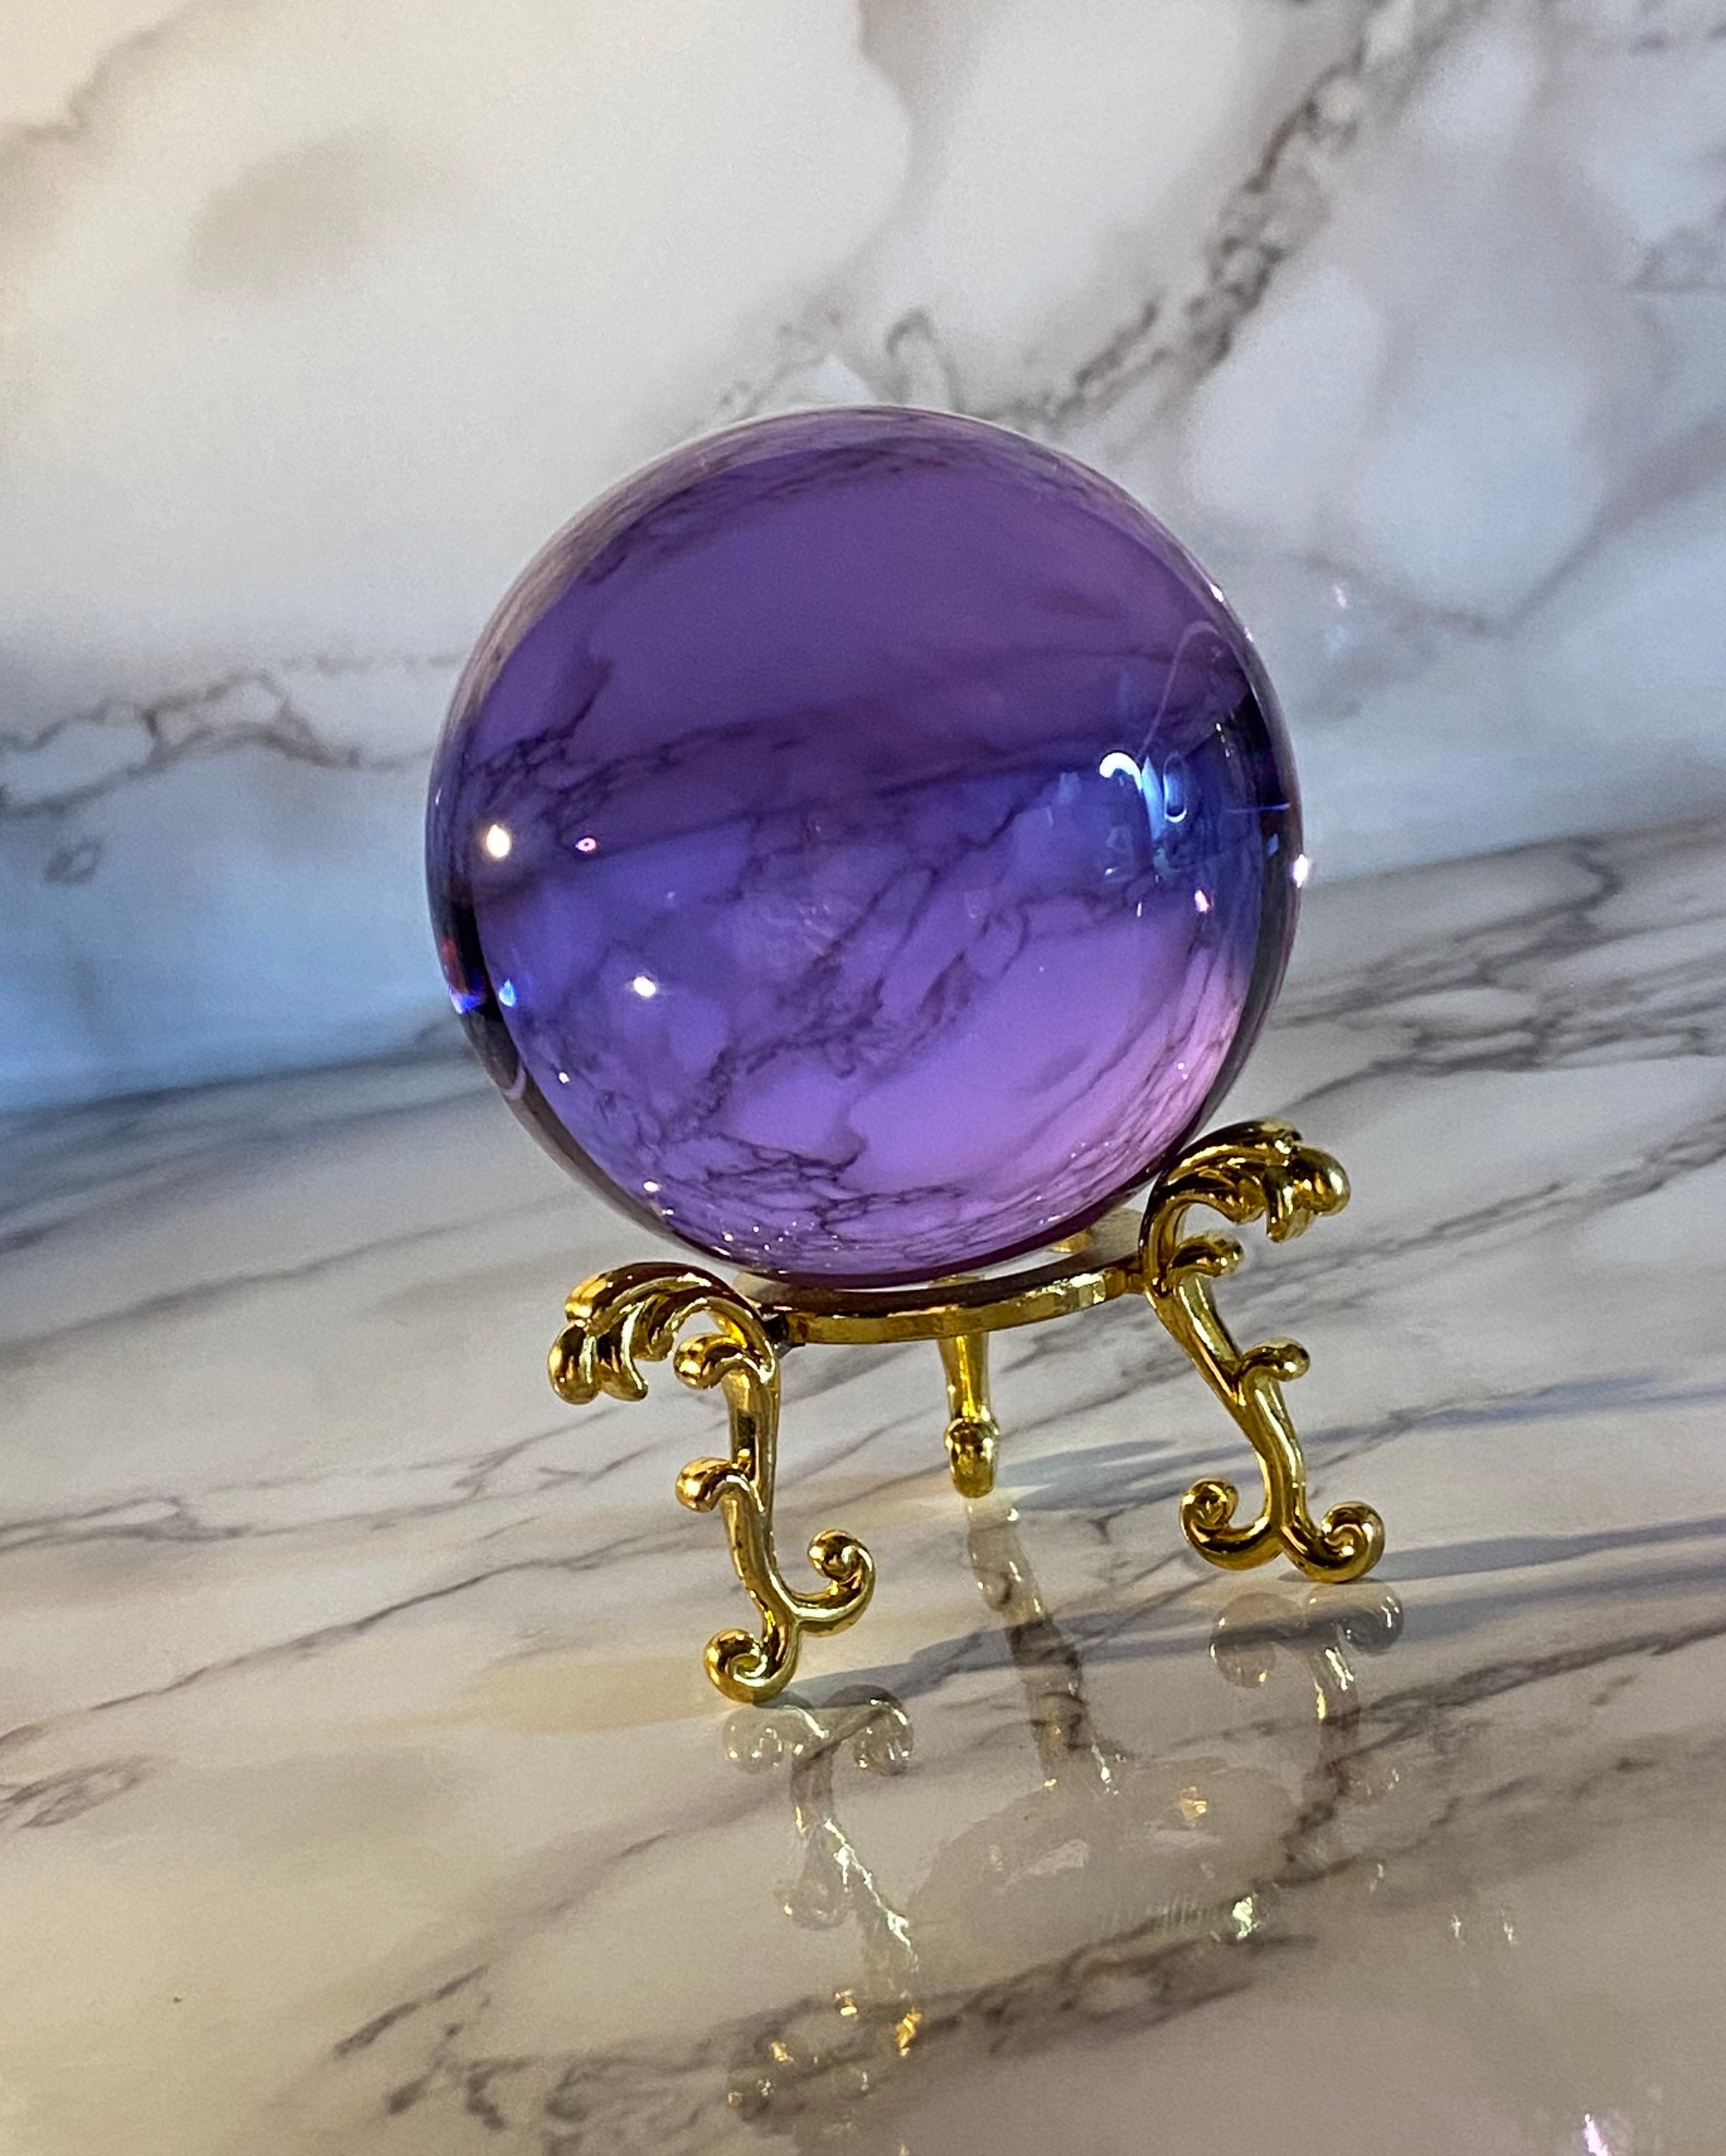 60mm Amethyst Purple Quartz Crystal Ball With Wooden Stand Healing